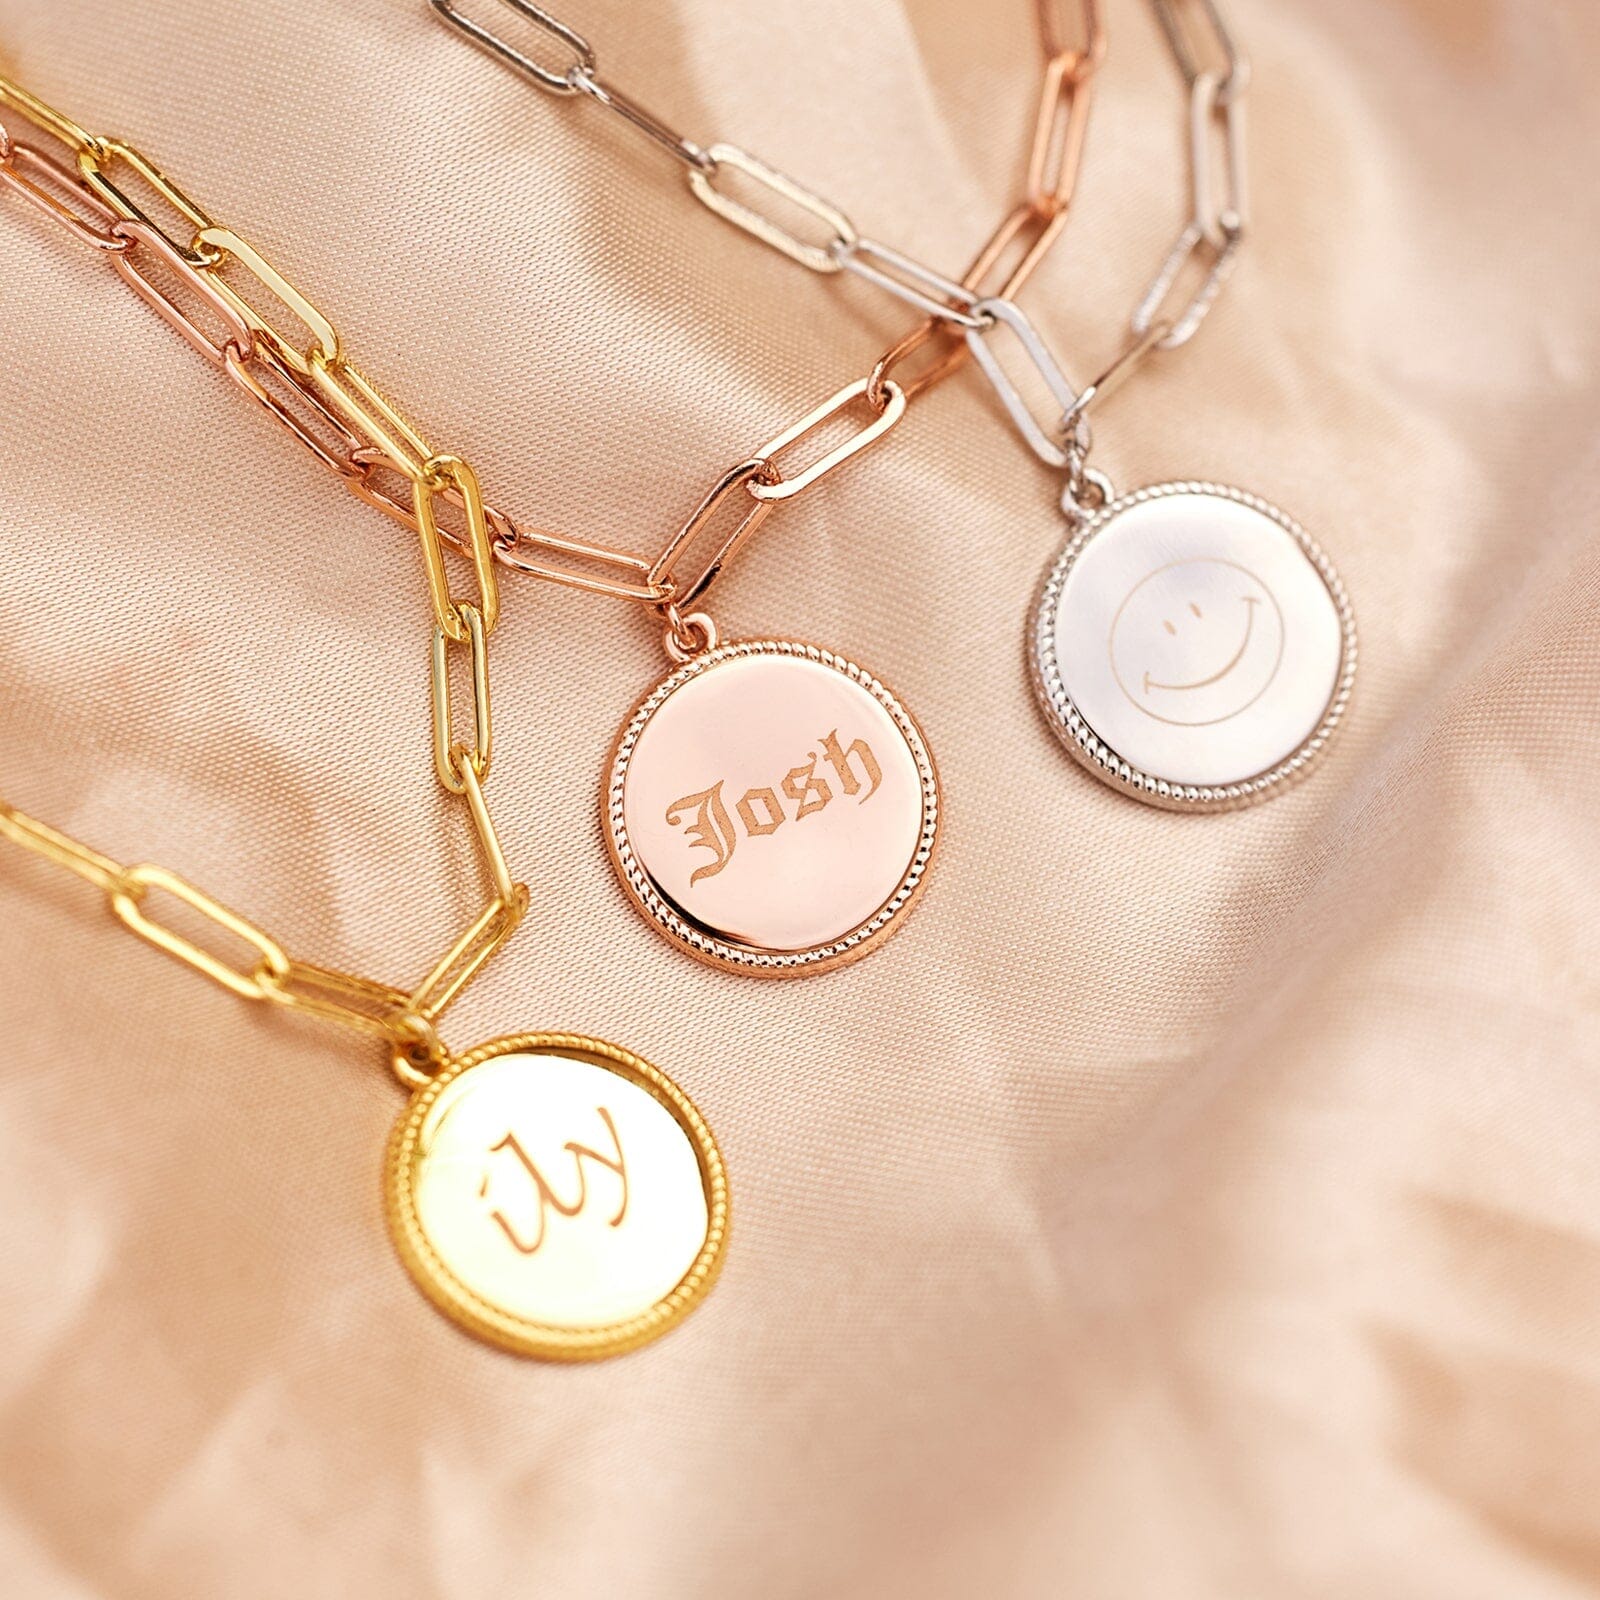 Friends And Family Personalised Locket With Photographs By Silk Purse,  Sow's Ear | notonthehighstreet.com